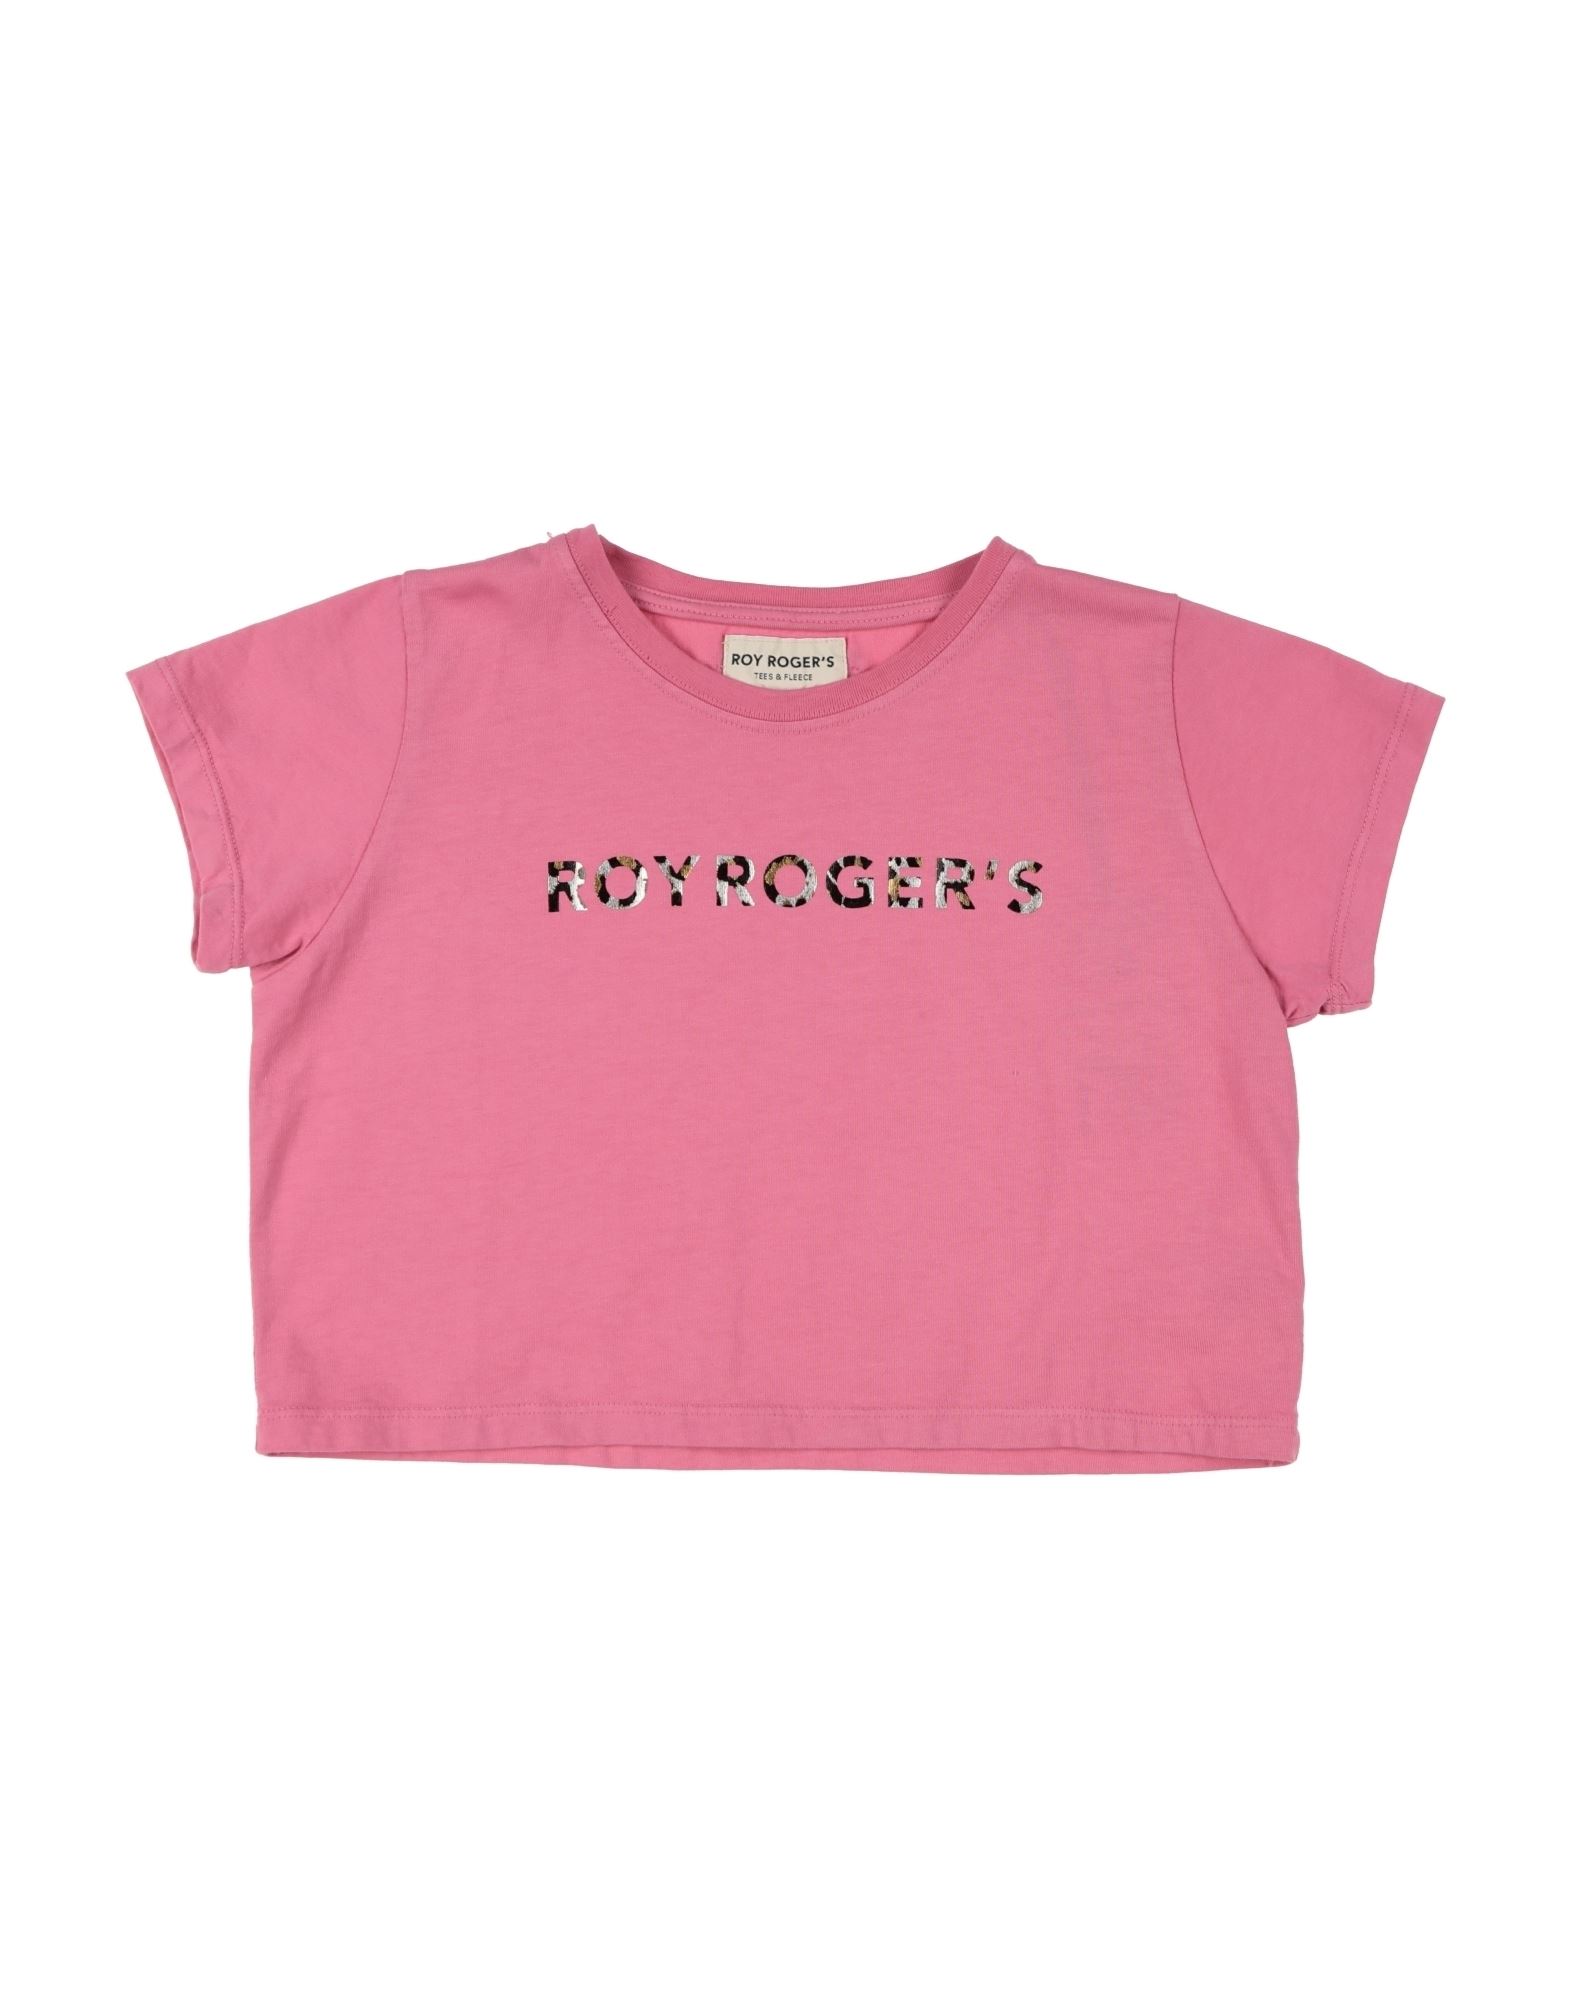 Roy Rogers Kids' Roÿ Roger's Toddler Girl T-shirt Fuchsia Size 6 Cotton In Pink